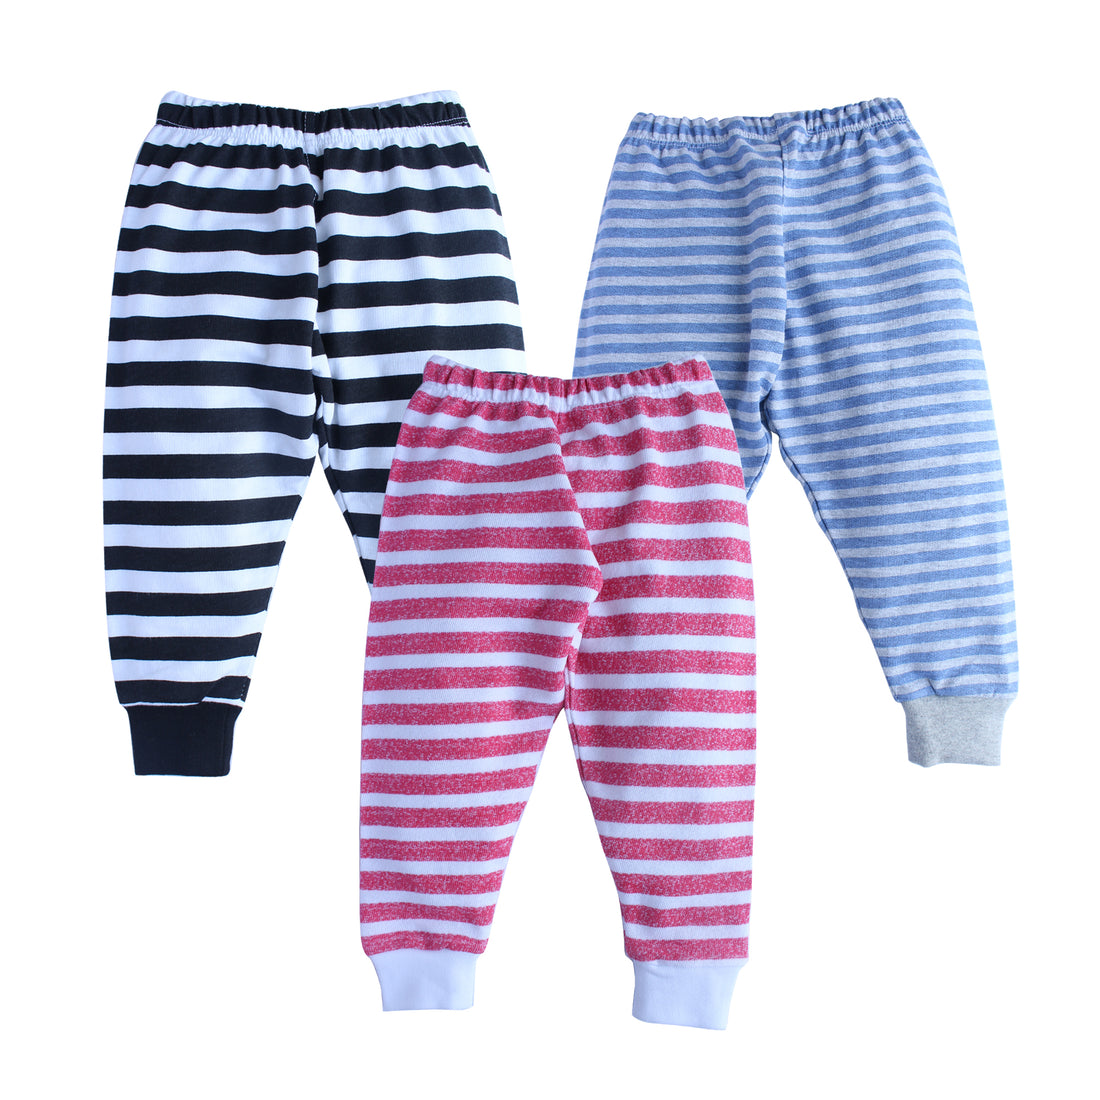 Assorted Pajama sets- 2 Pack, 3 Pack & 5 Pack (0-6 Yrs)